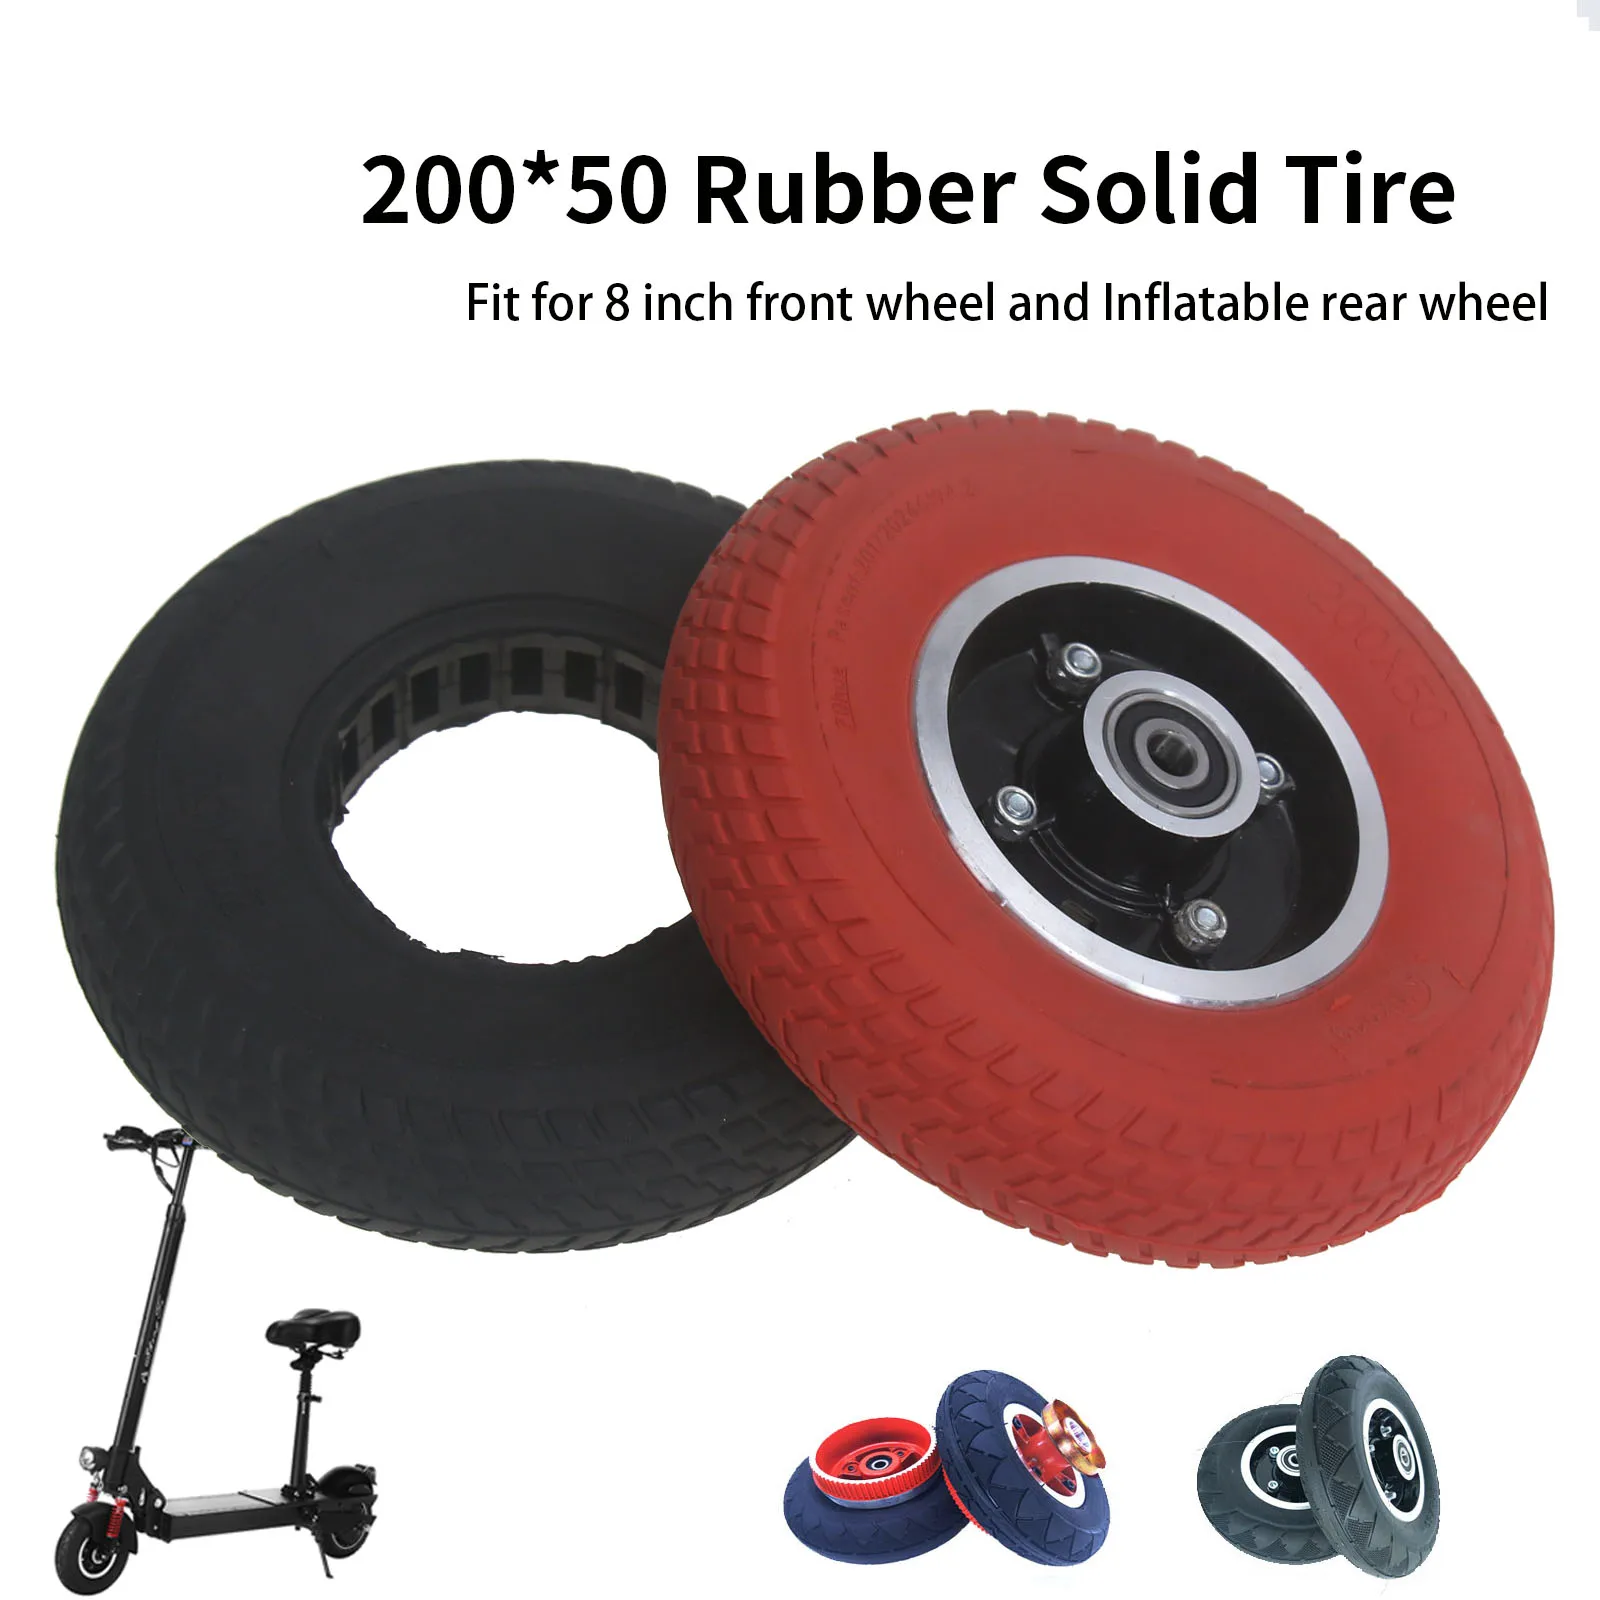 

8 Inch 200*50 Front Wheel Solid Tire Rear Wheel Non-Inflatable Shock Absorption and Explosion-Proof Tyre for Skateboard Bicycle